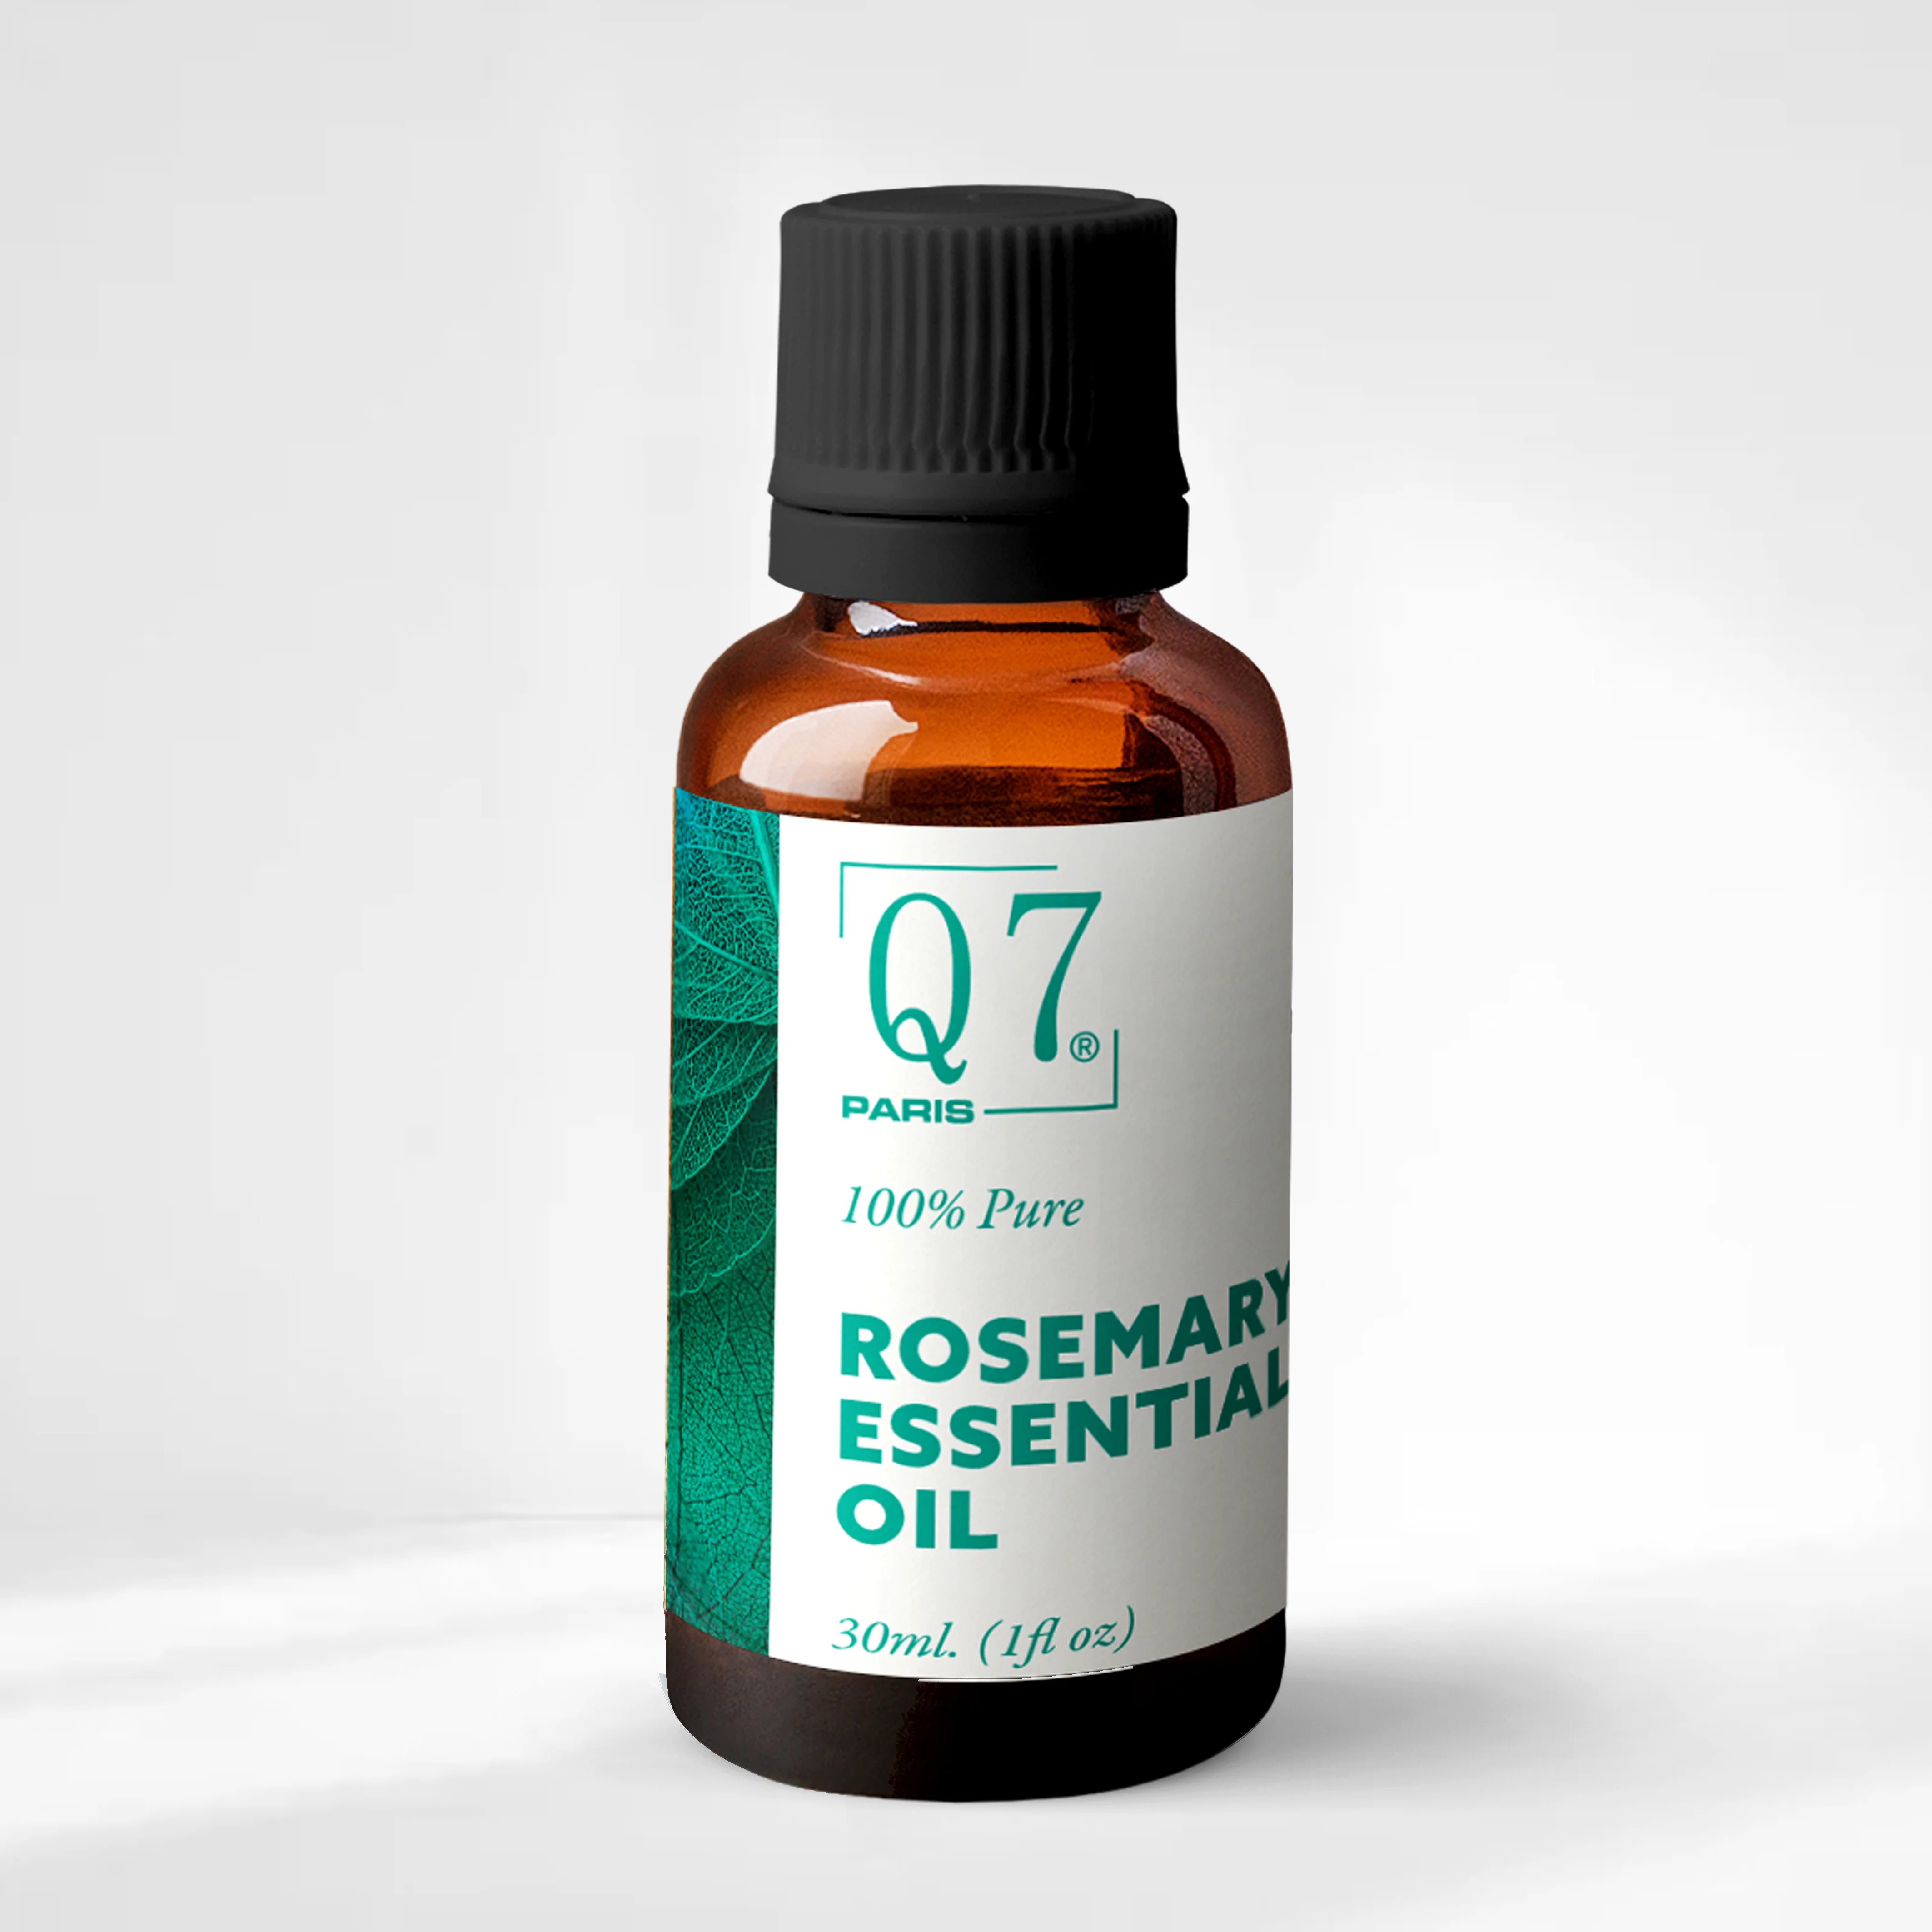 100% Pure Rosemary Essential Oil – 30ml